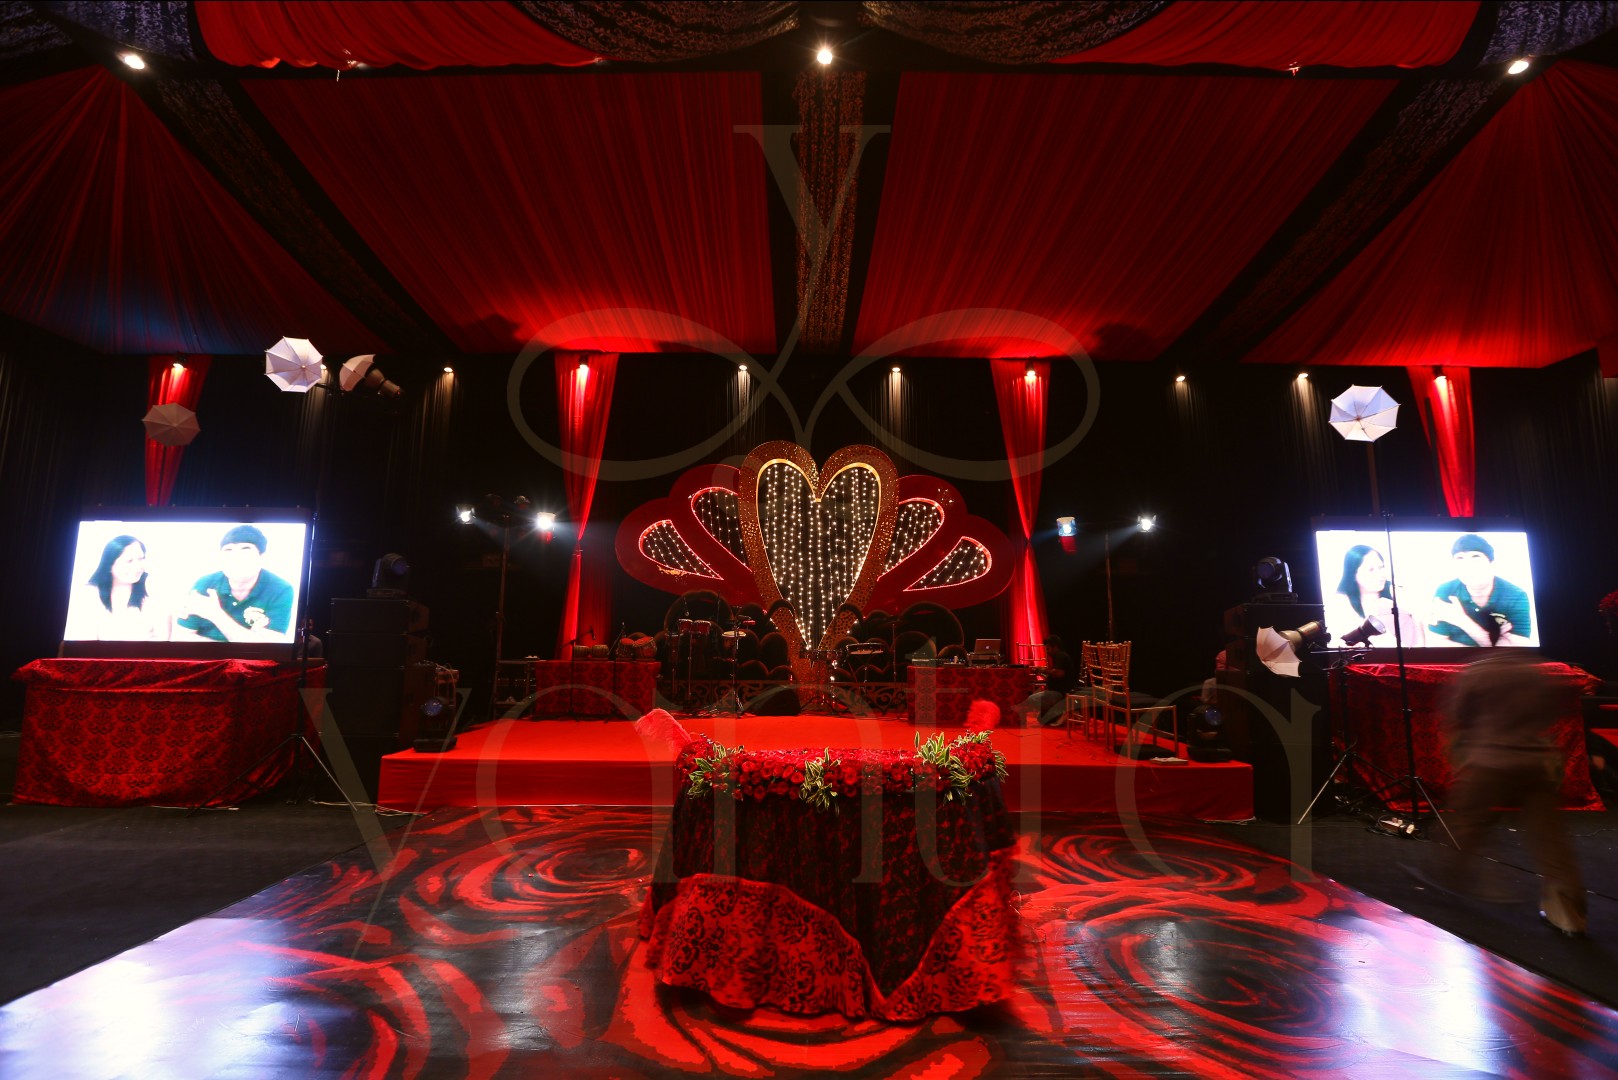 yantra-decor-events-cocktail-party-image-decor-stage